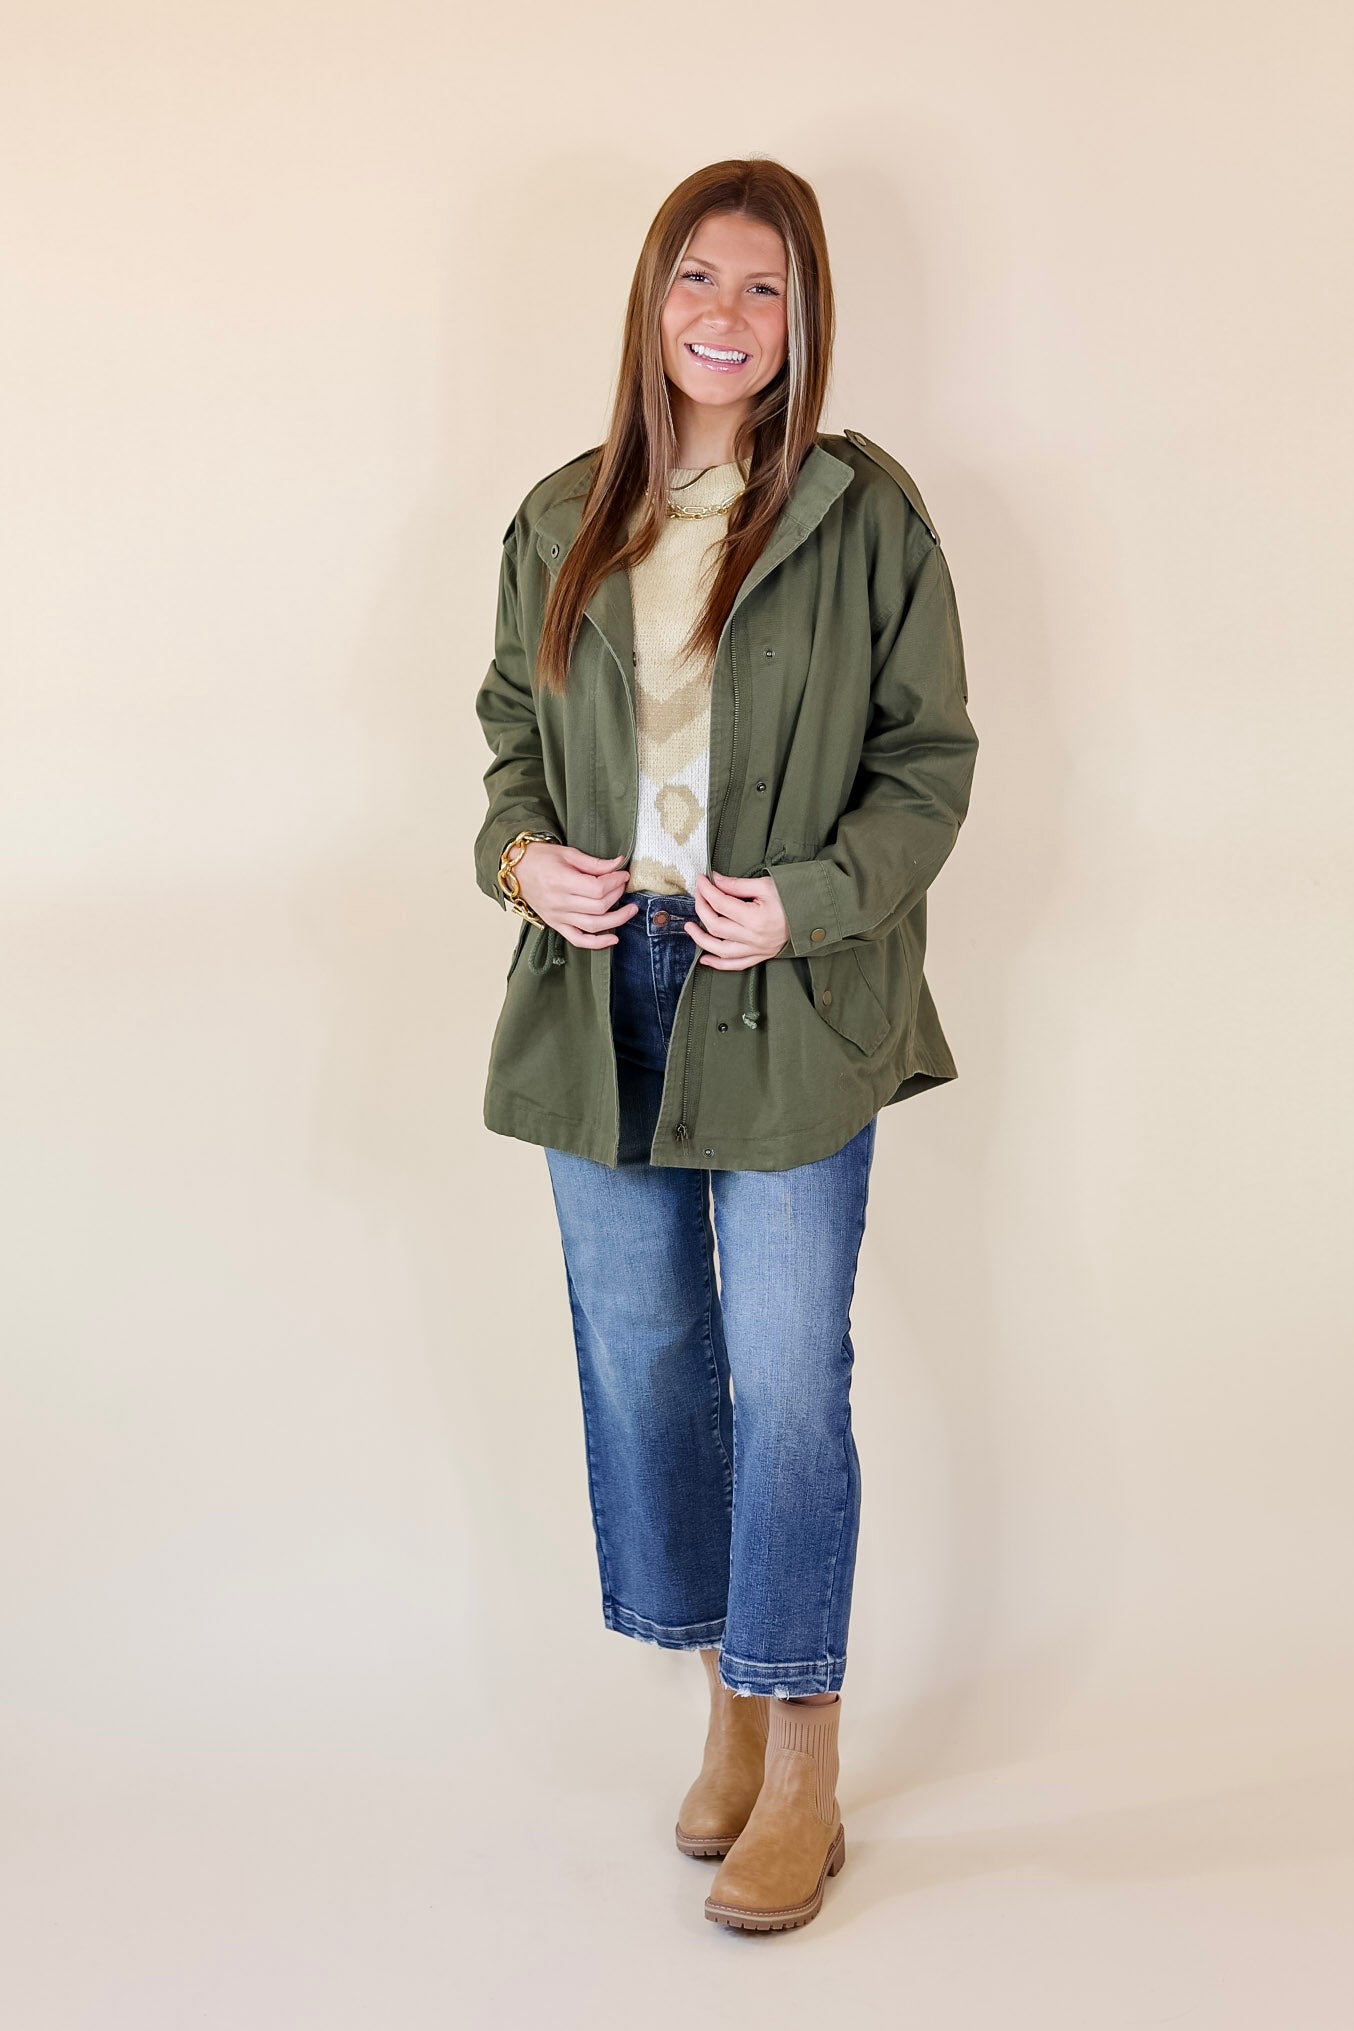 Anything is Possible Button and Zip Up Utility Jacket in Olive Green - Giddy Up Glamour Boutique